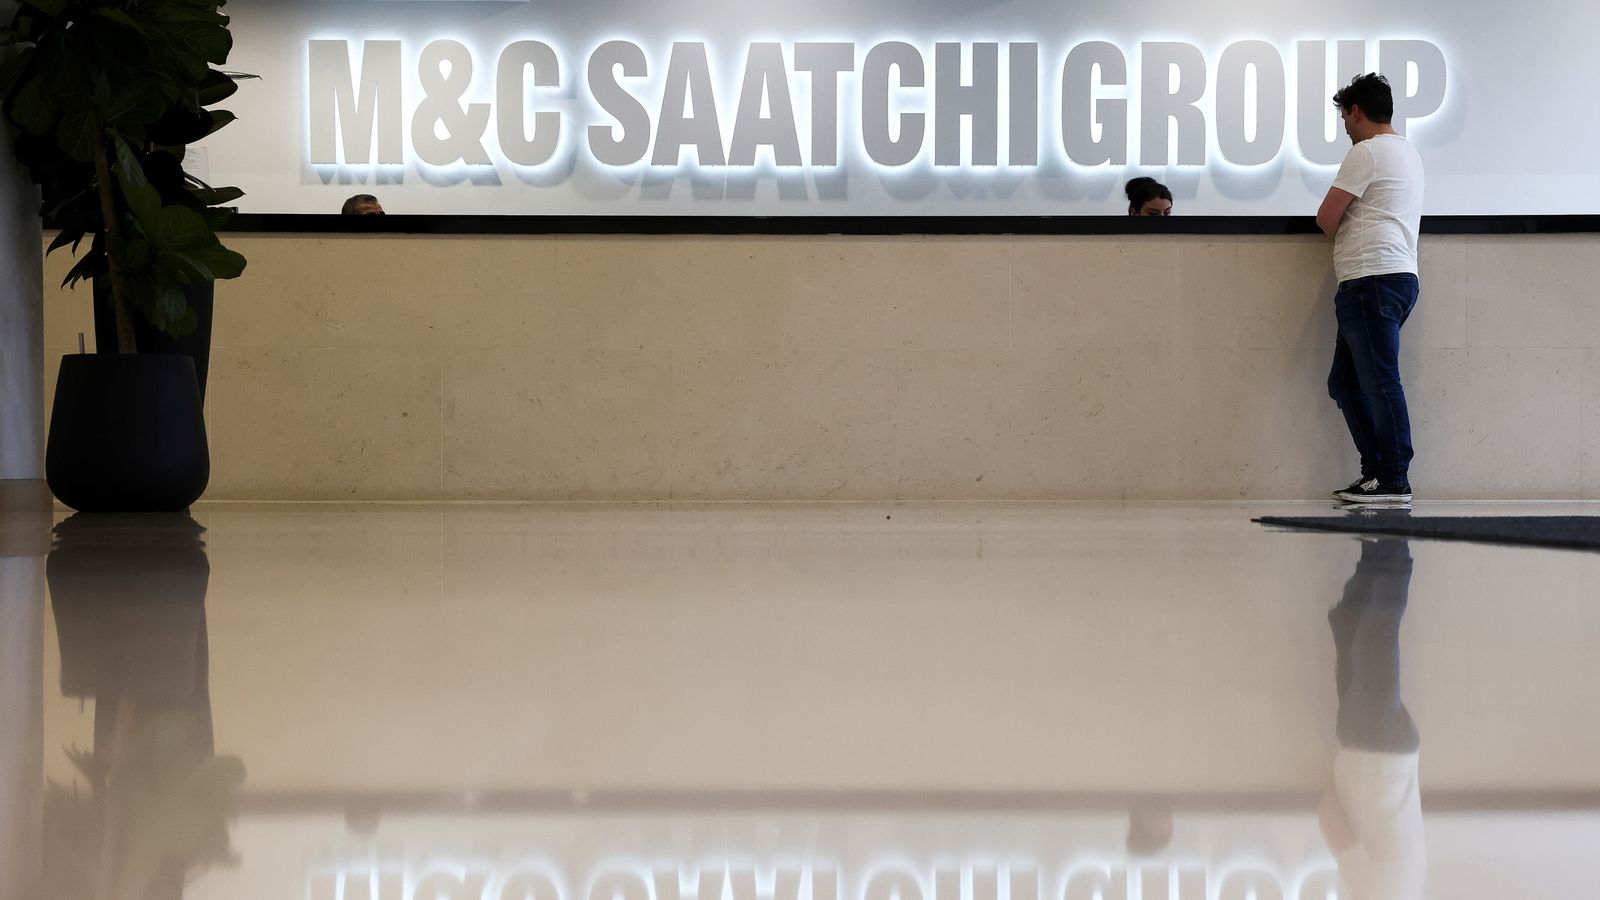 Channel 4 exec Al-Qassab to be named next M&C Saatchi chief | Business News